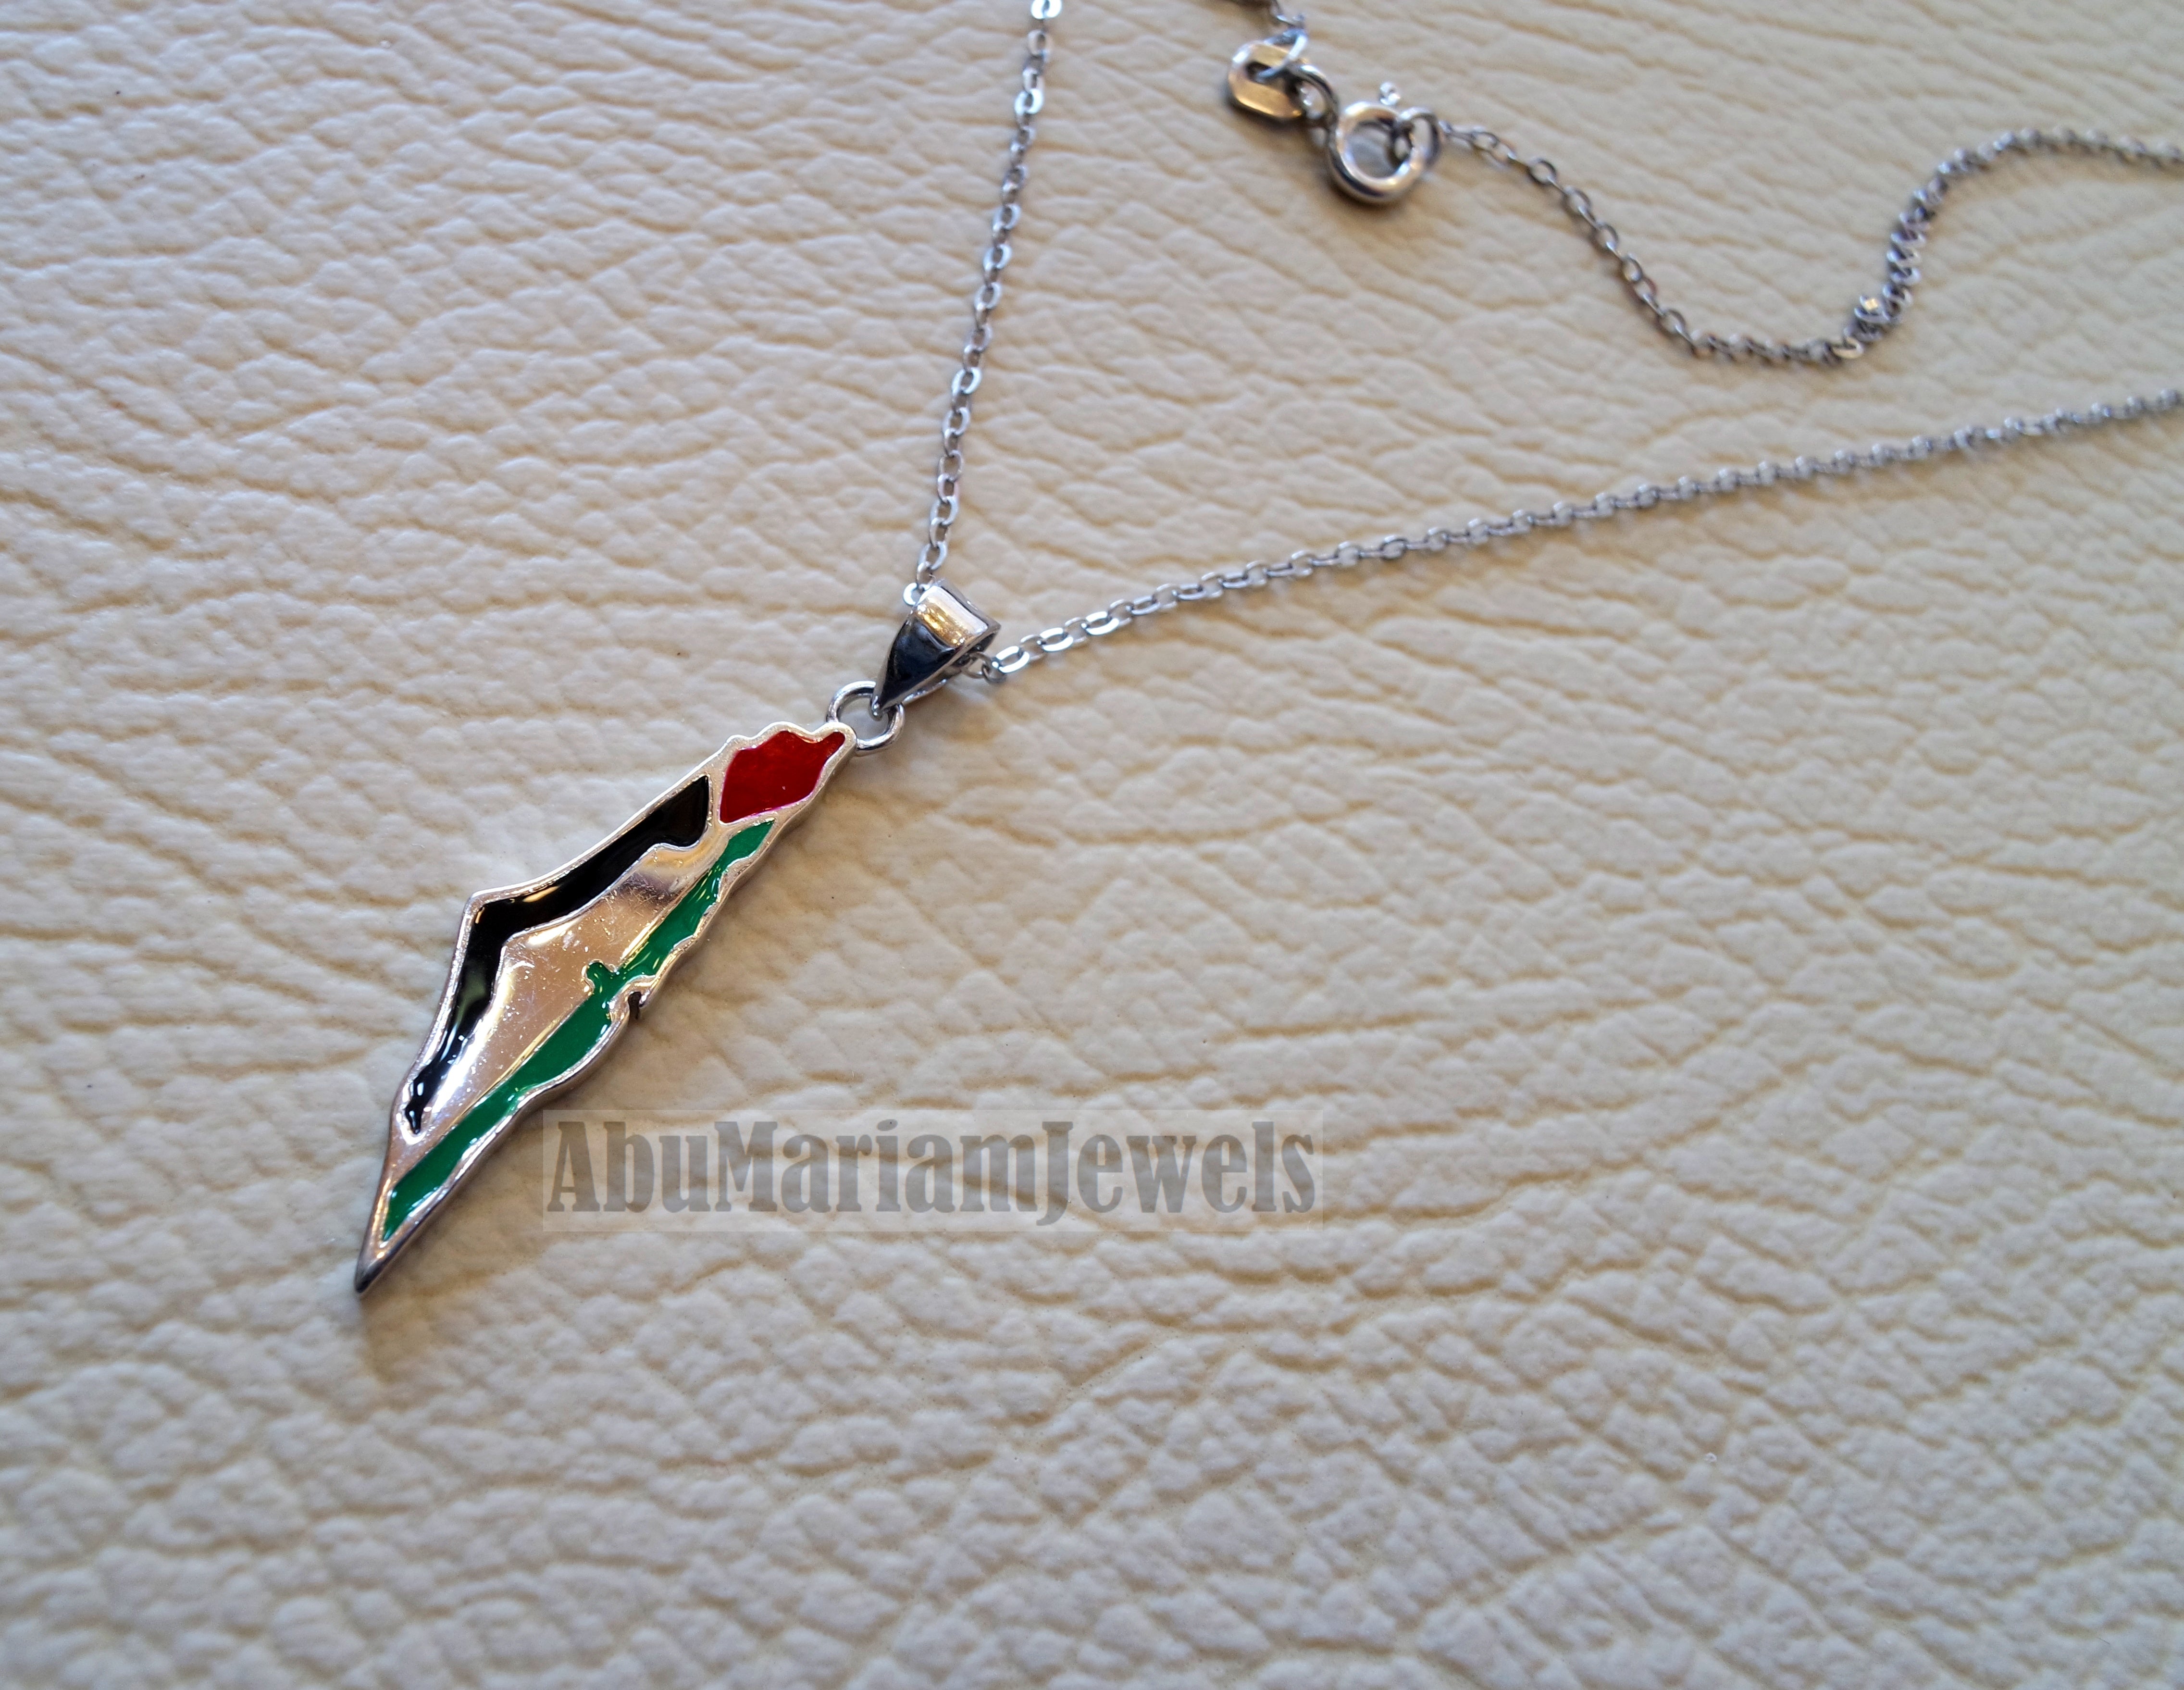 Palestine map pendant with flag colors enamel & sterling silver 925 k high quality jewelry arabic fast shipping خارطه و علم فلسطين